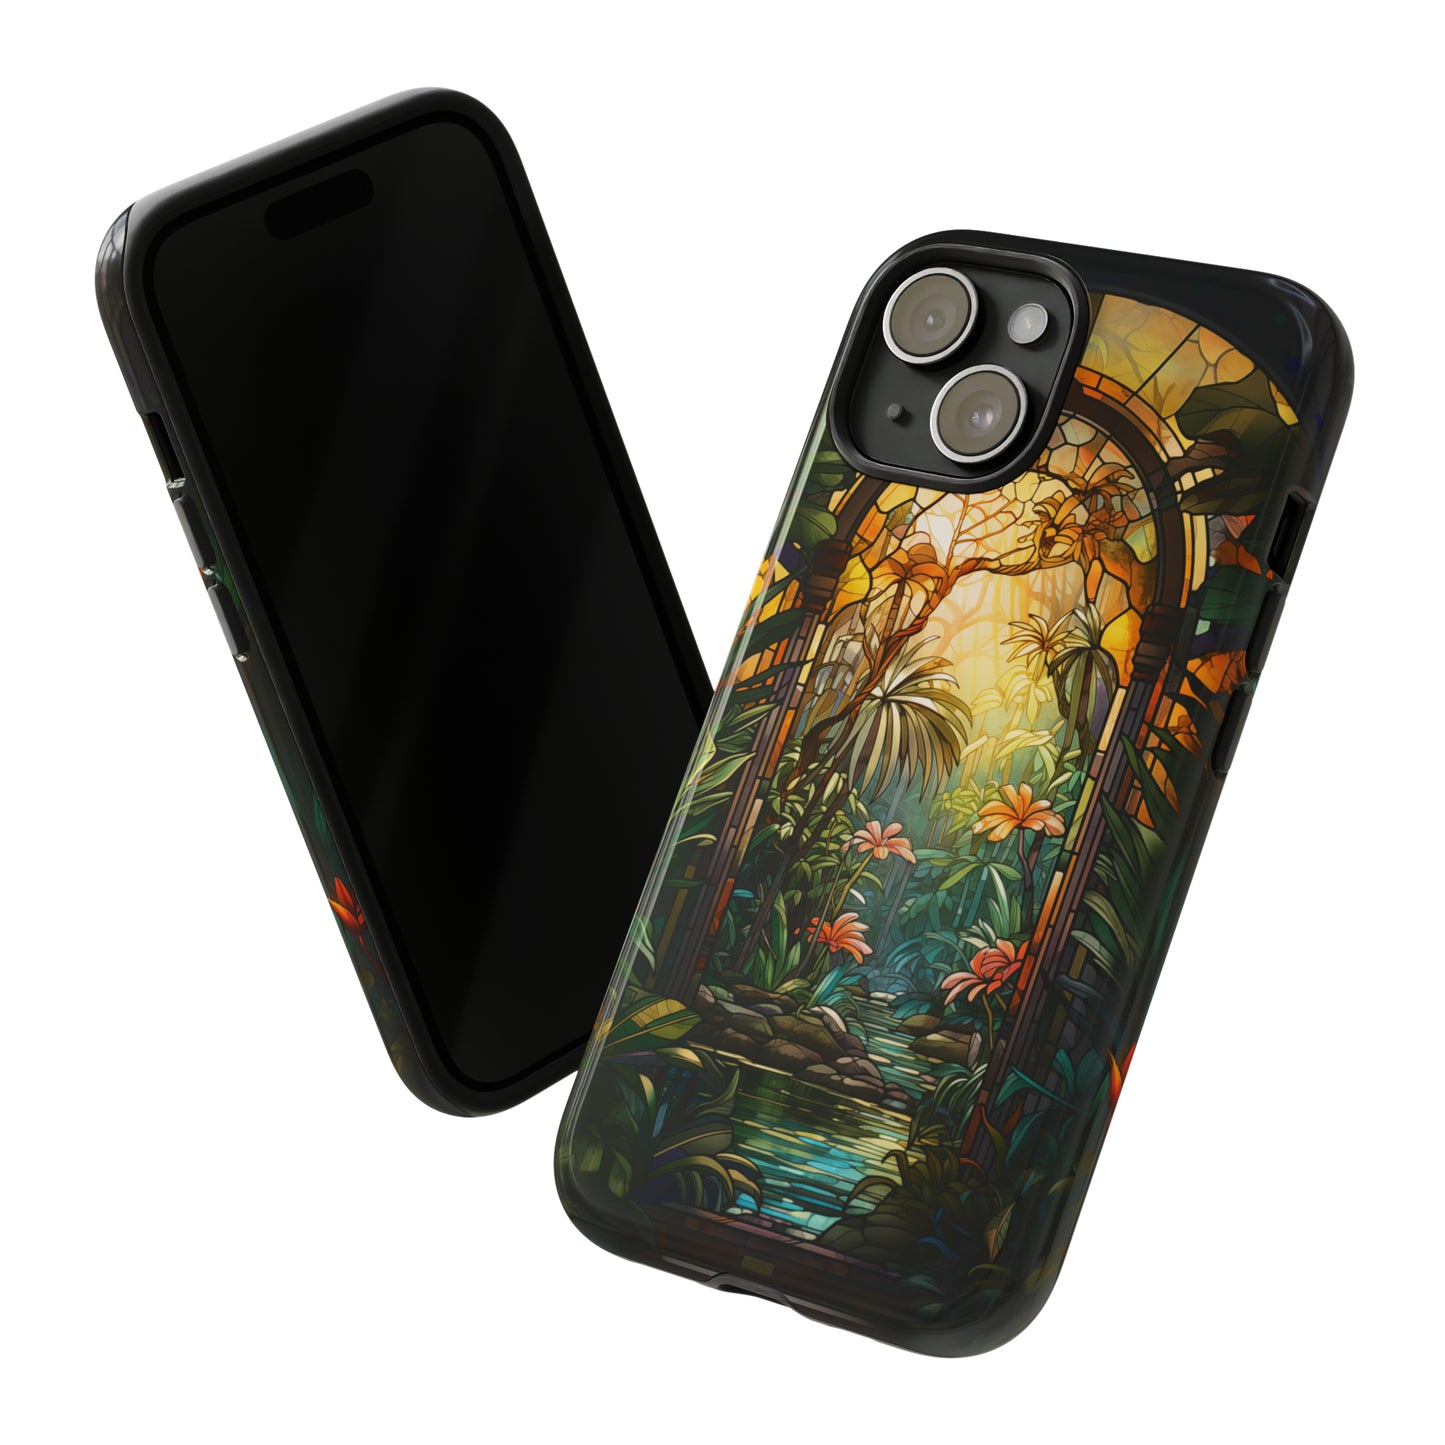 Stained Glass Phone Case Floral Aesthetic Art Nouveau Style